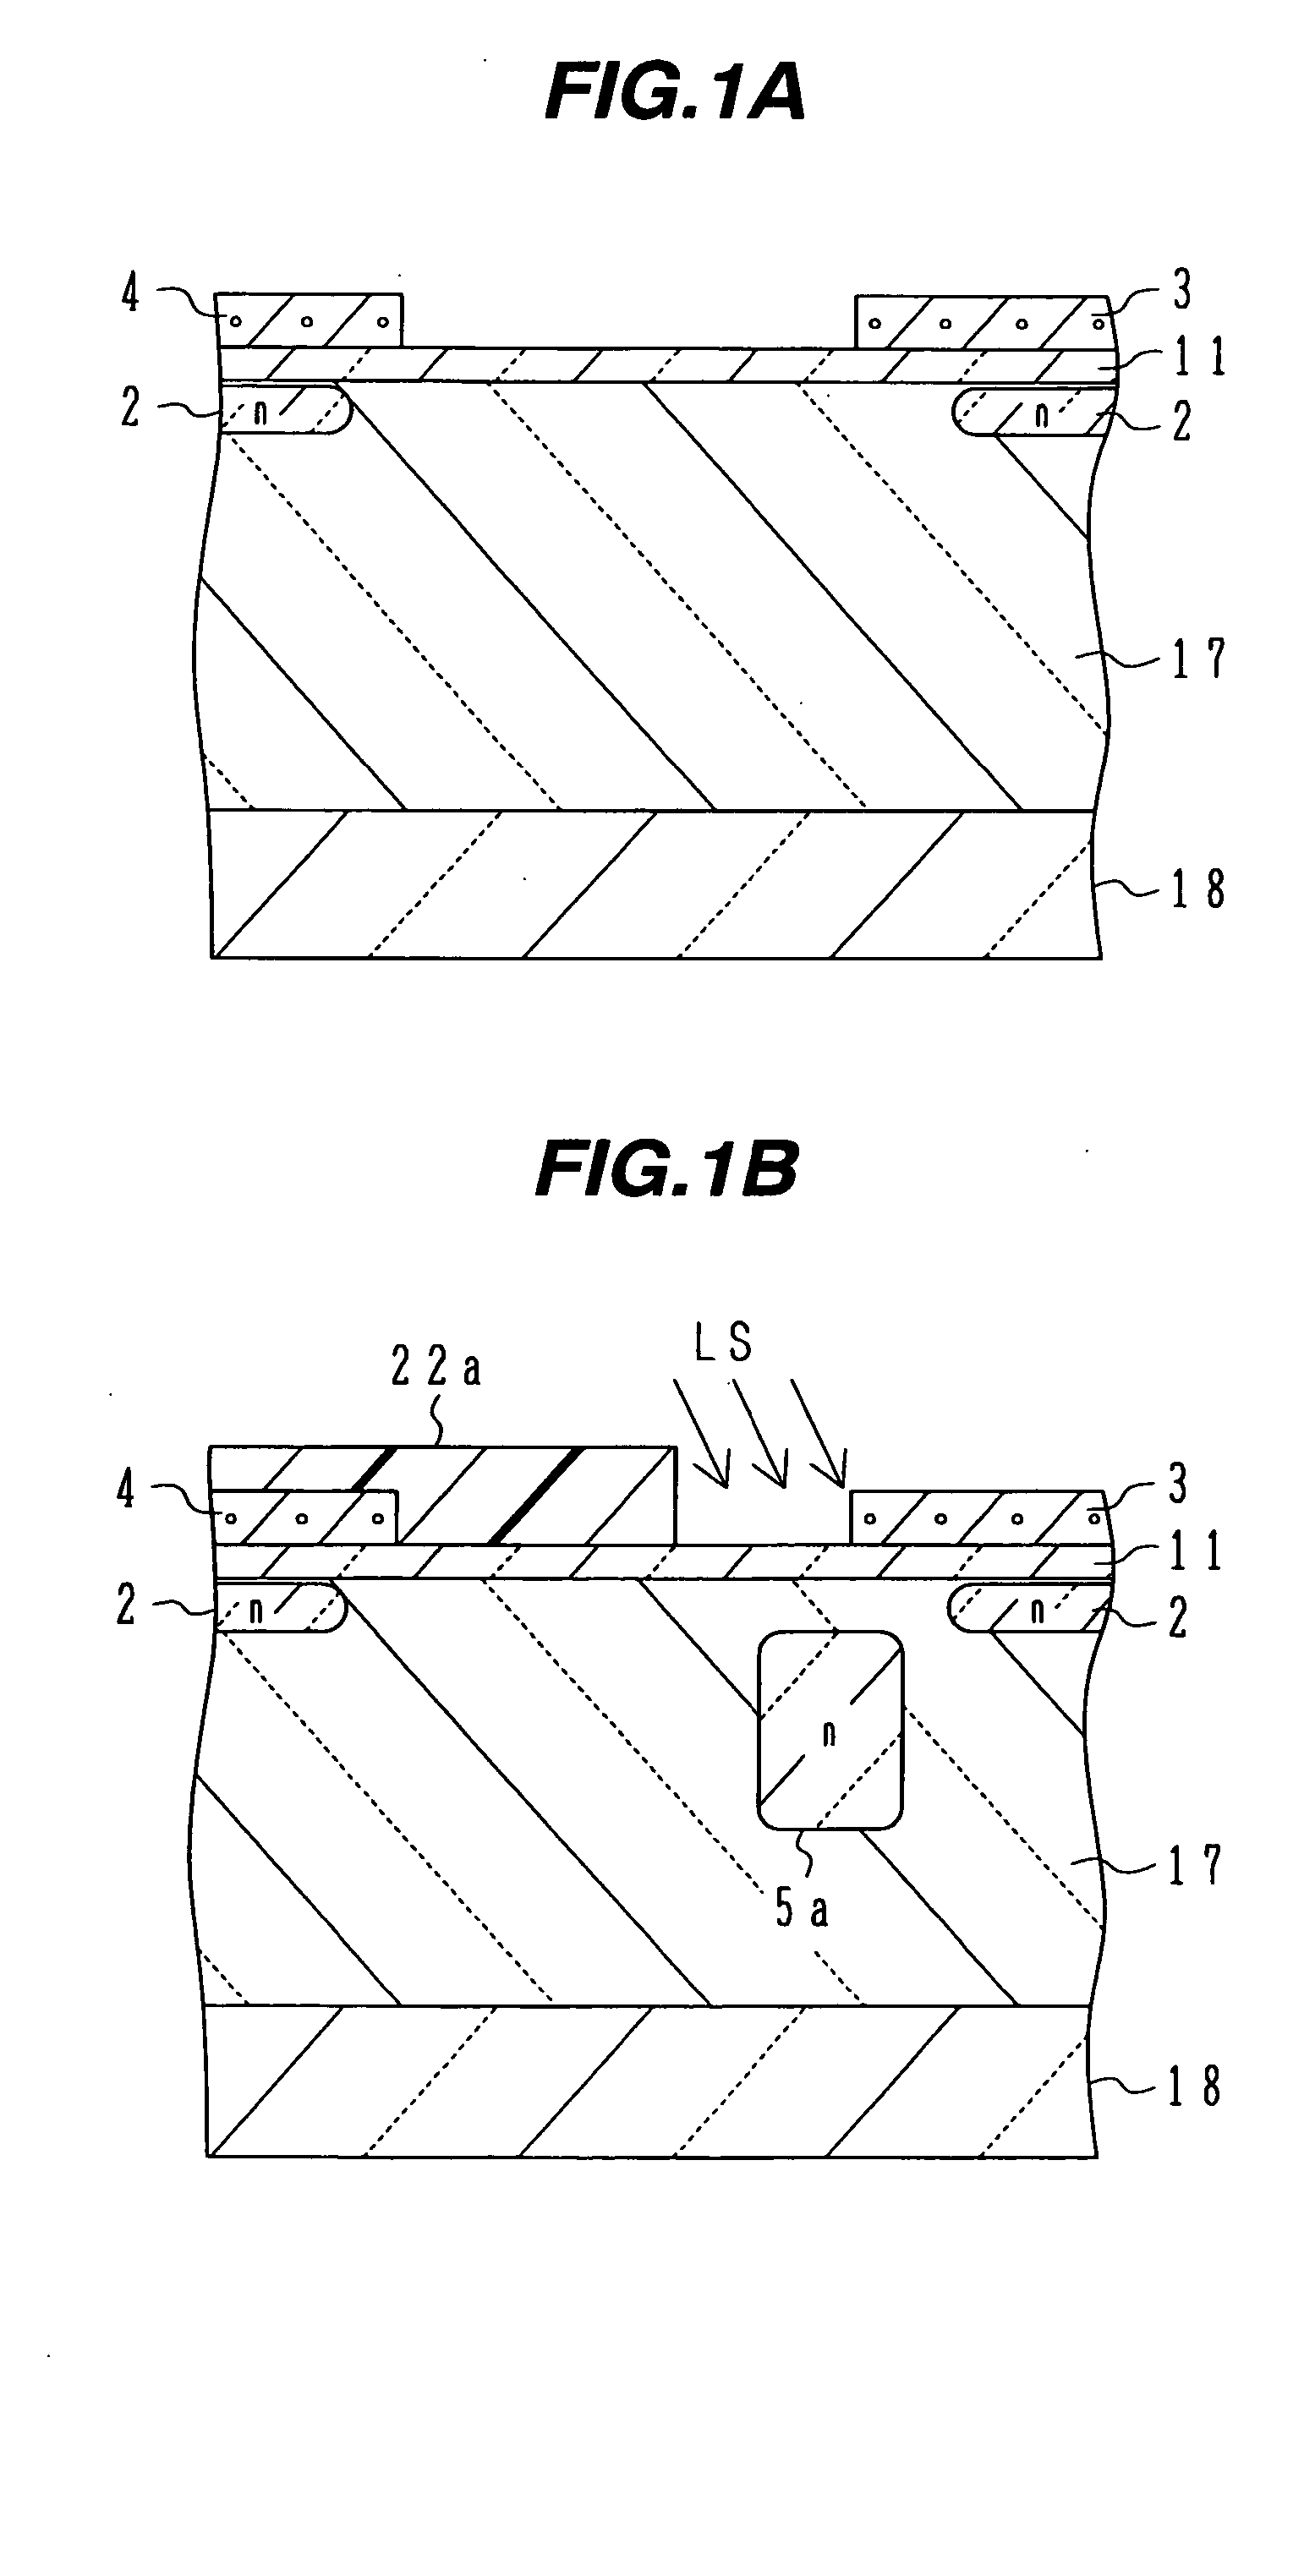 Manufacture of solid state imager having plurality of photosensors per each pixel